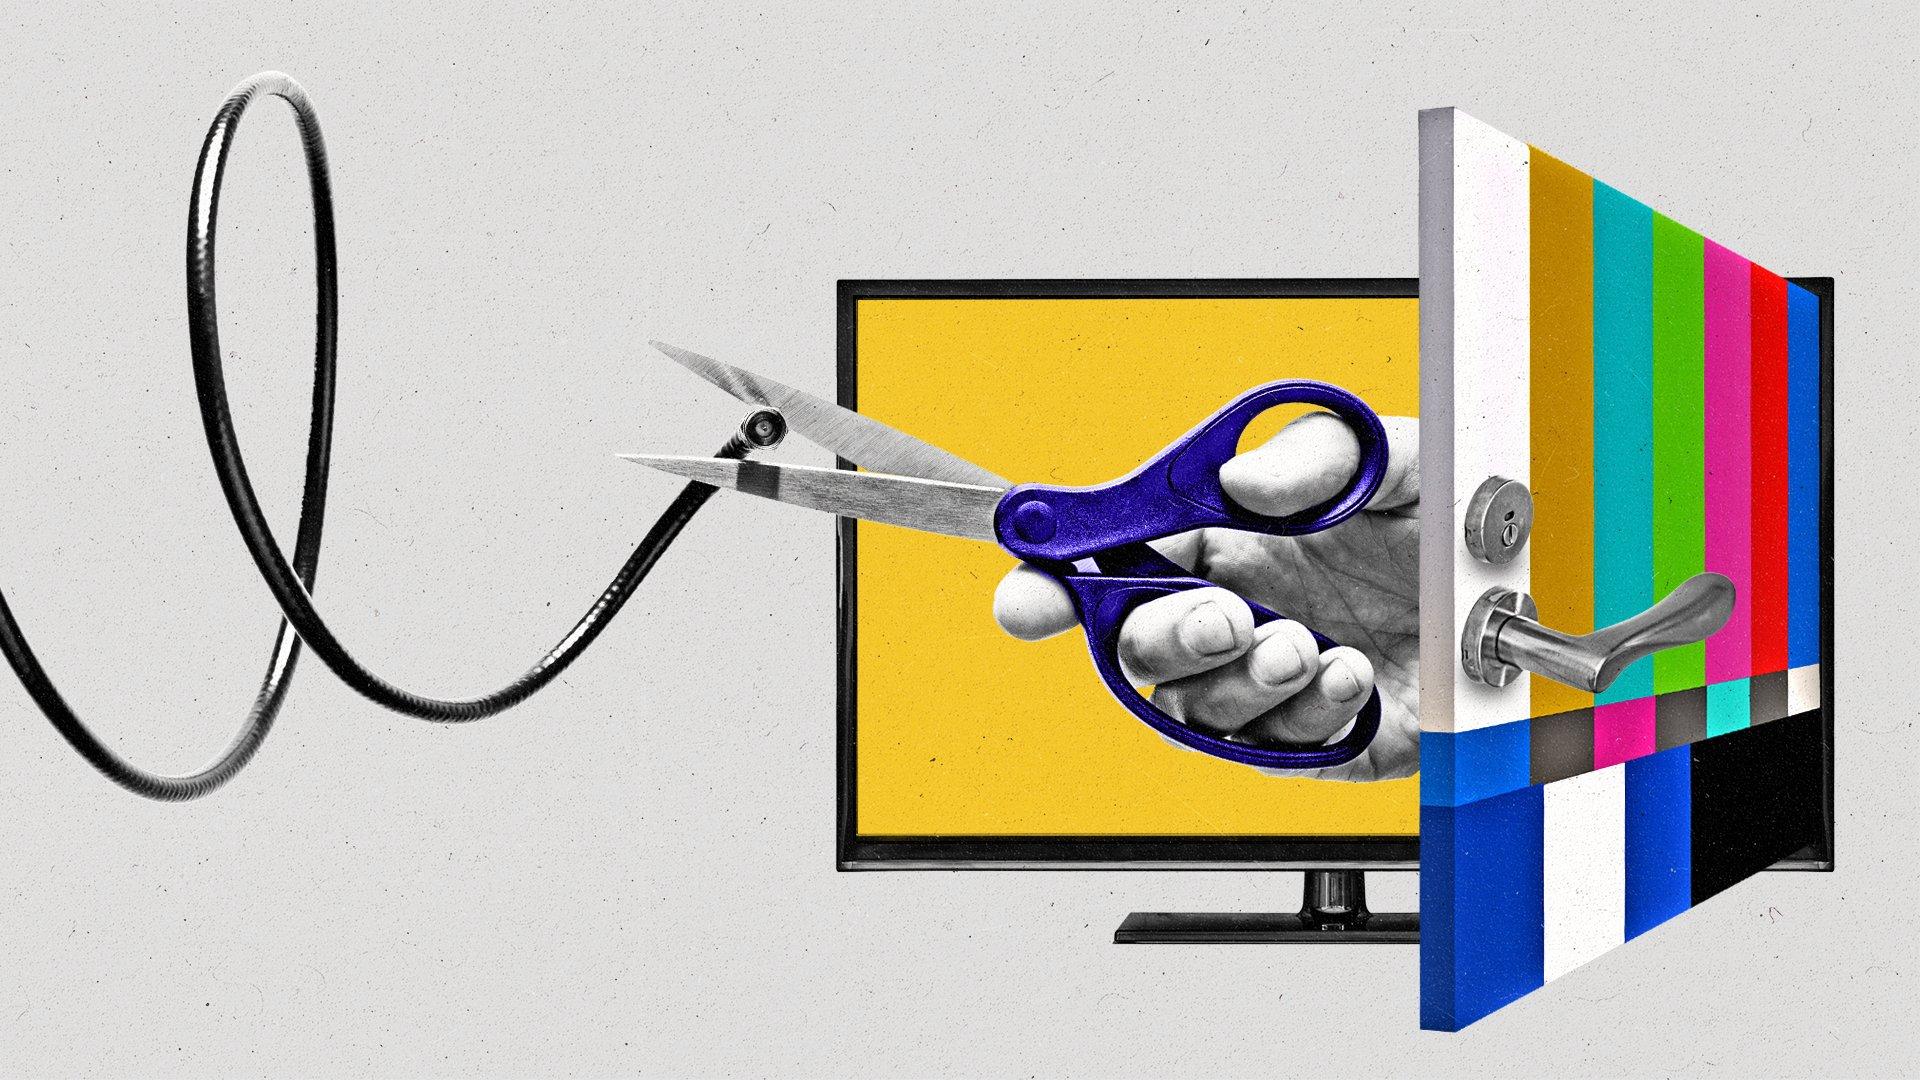 Hand with scissors emerges from a door on a TV screen and cuts a black cord.